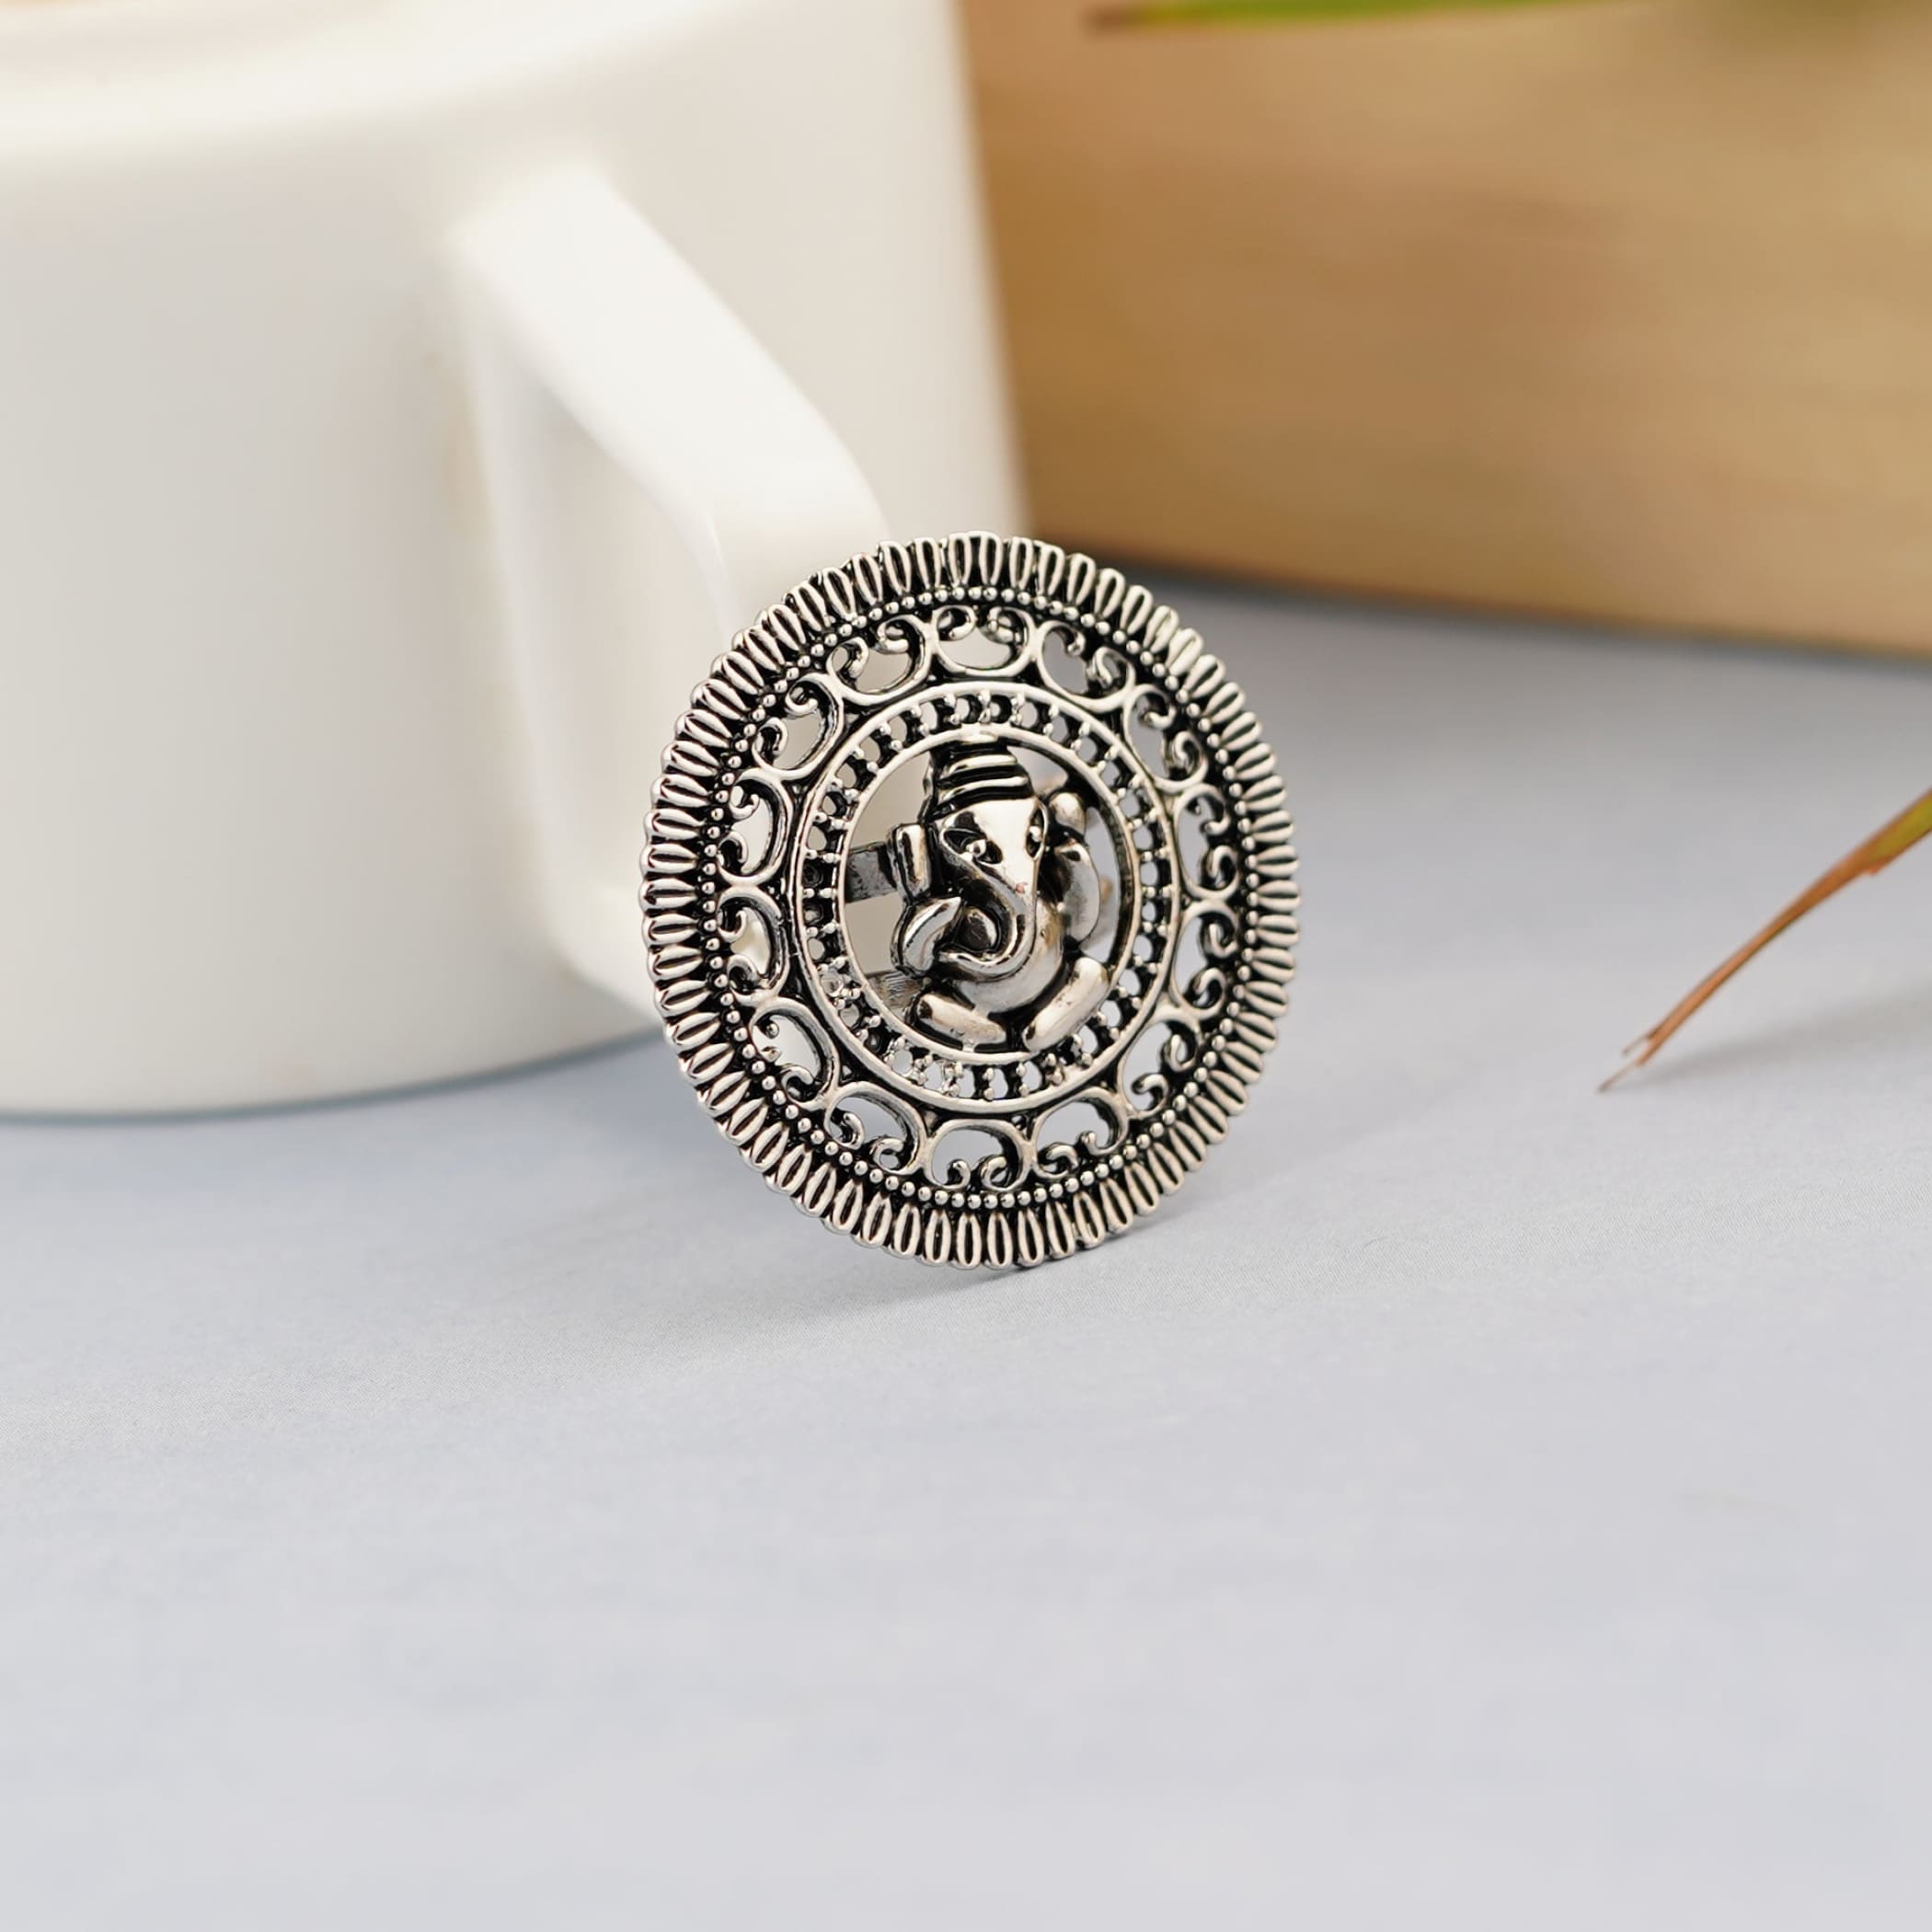 Ganesha classic ring with oxidized plating women rings